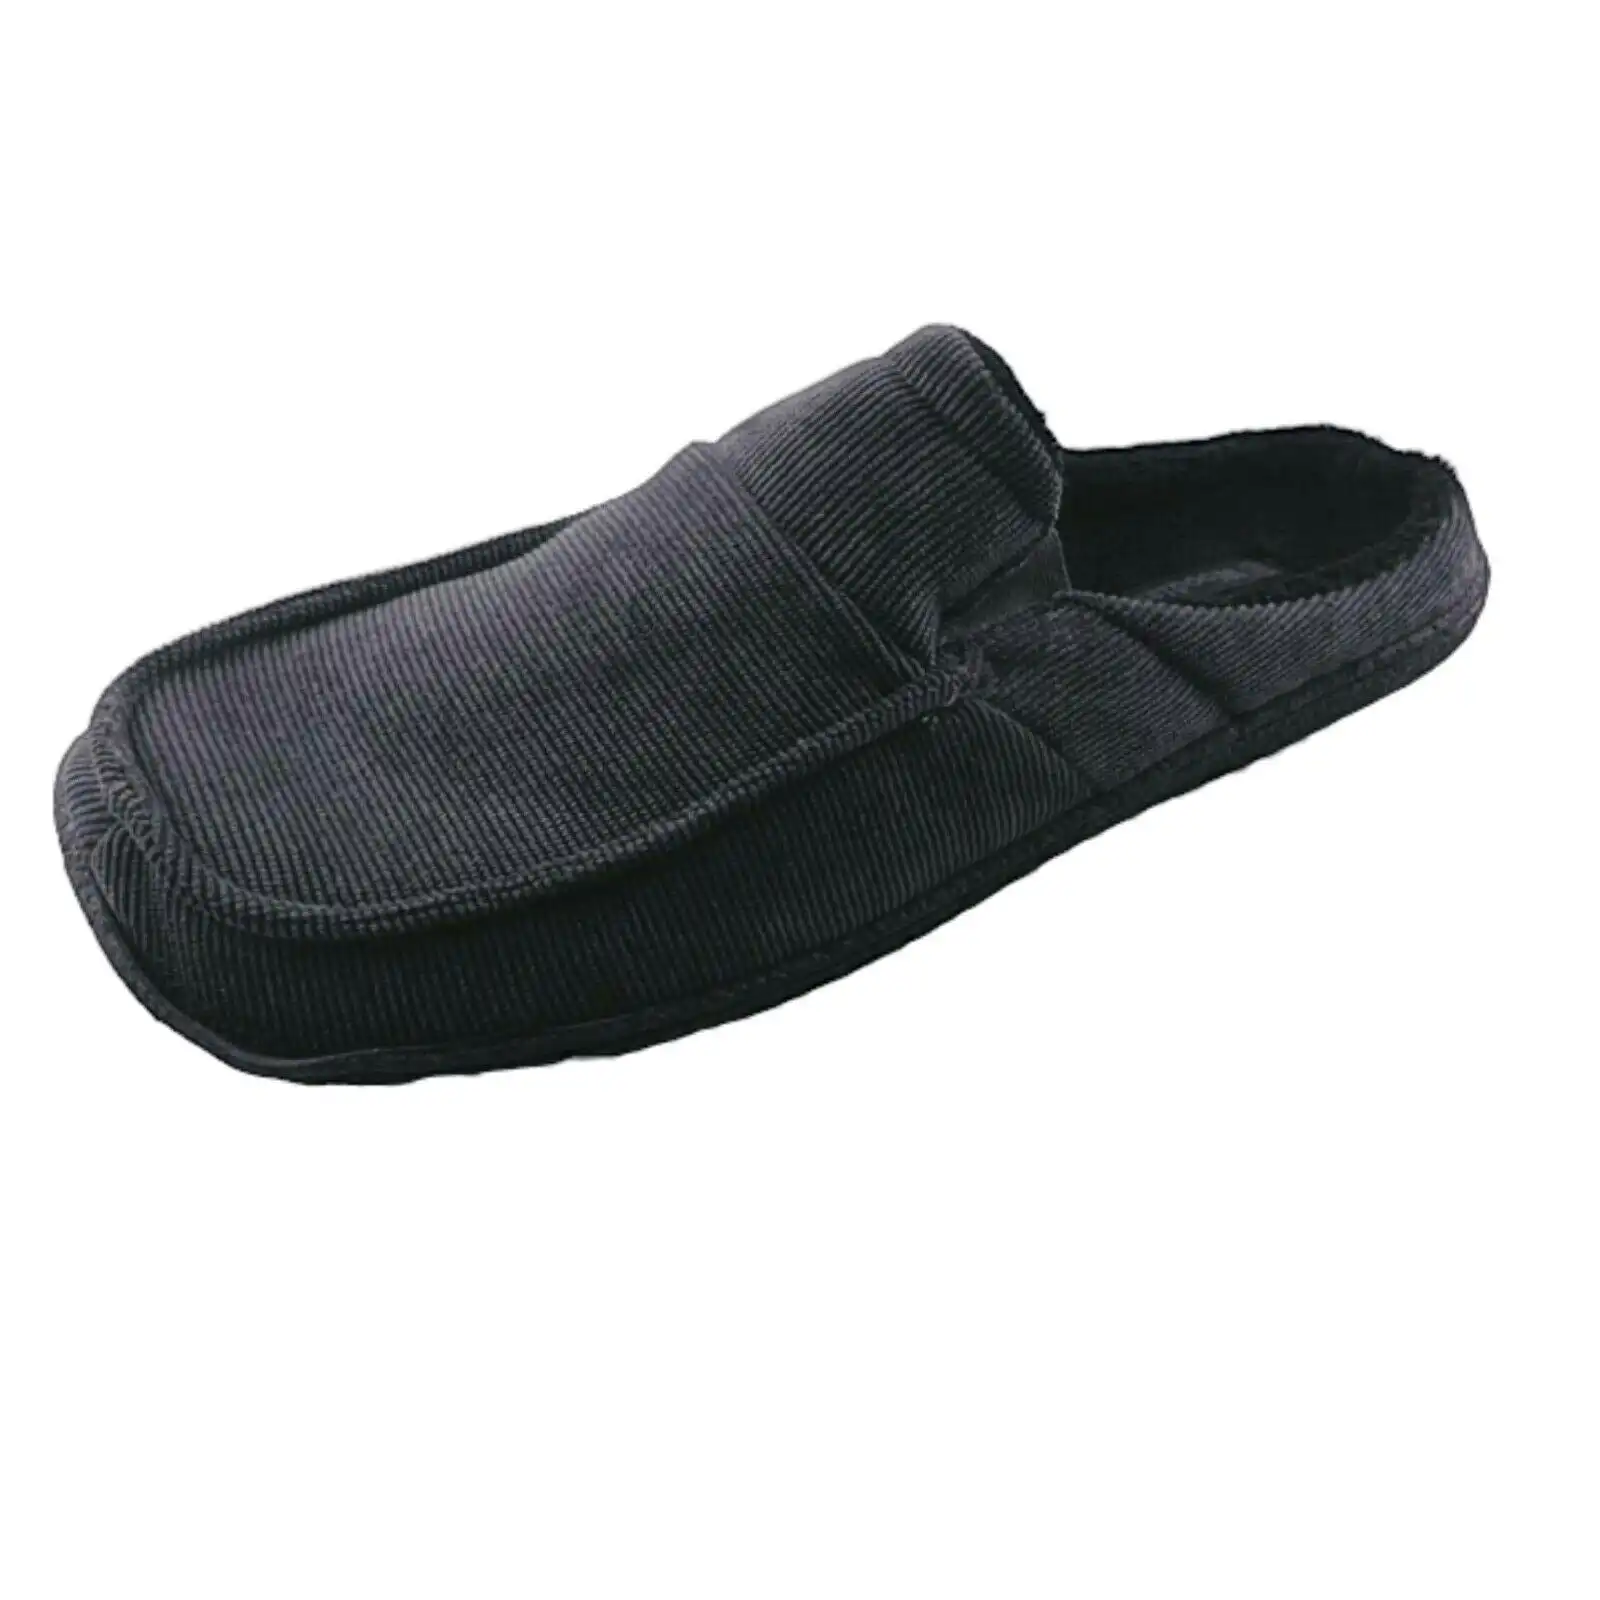 Woodlands Sperry Slippers Mens Warm Grey Slip On Backless Soft Home Shoes Comfy